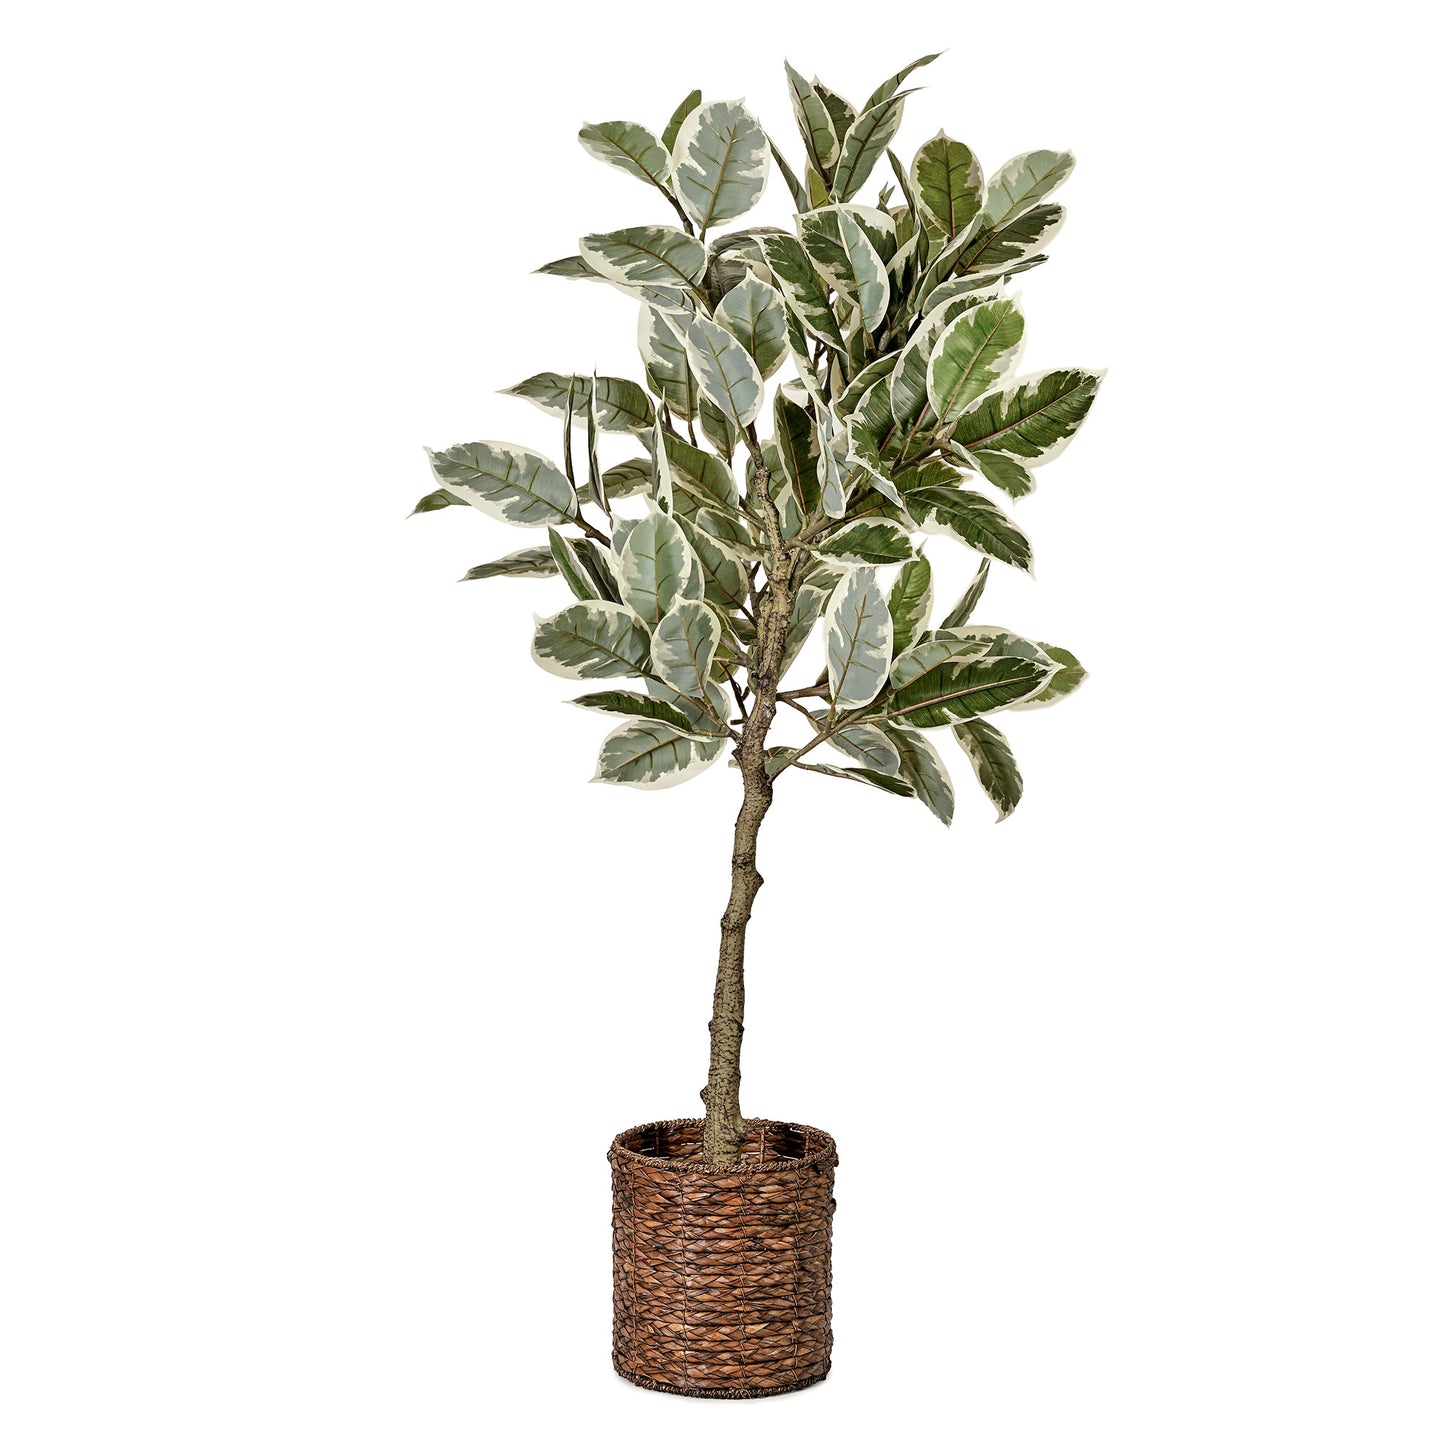 Artificial Variegated Rubber Tree in Water Hyacinth Woven Basket - 60" - Botanica Home ™